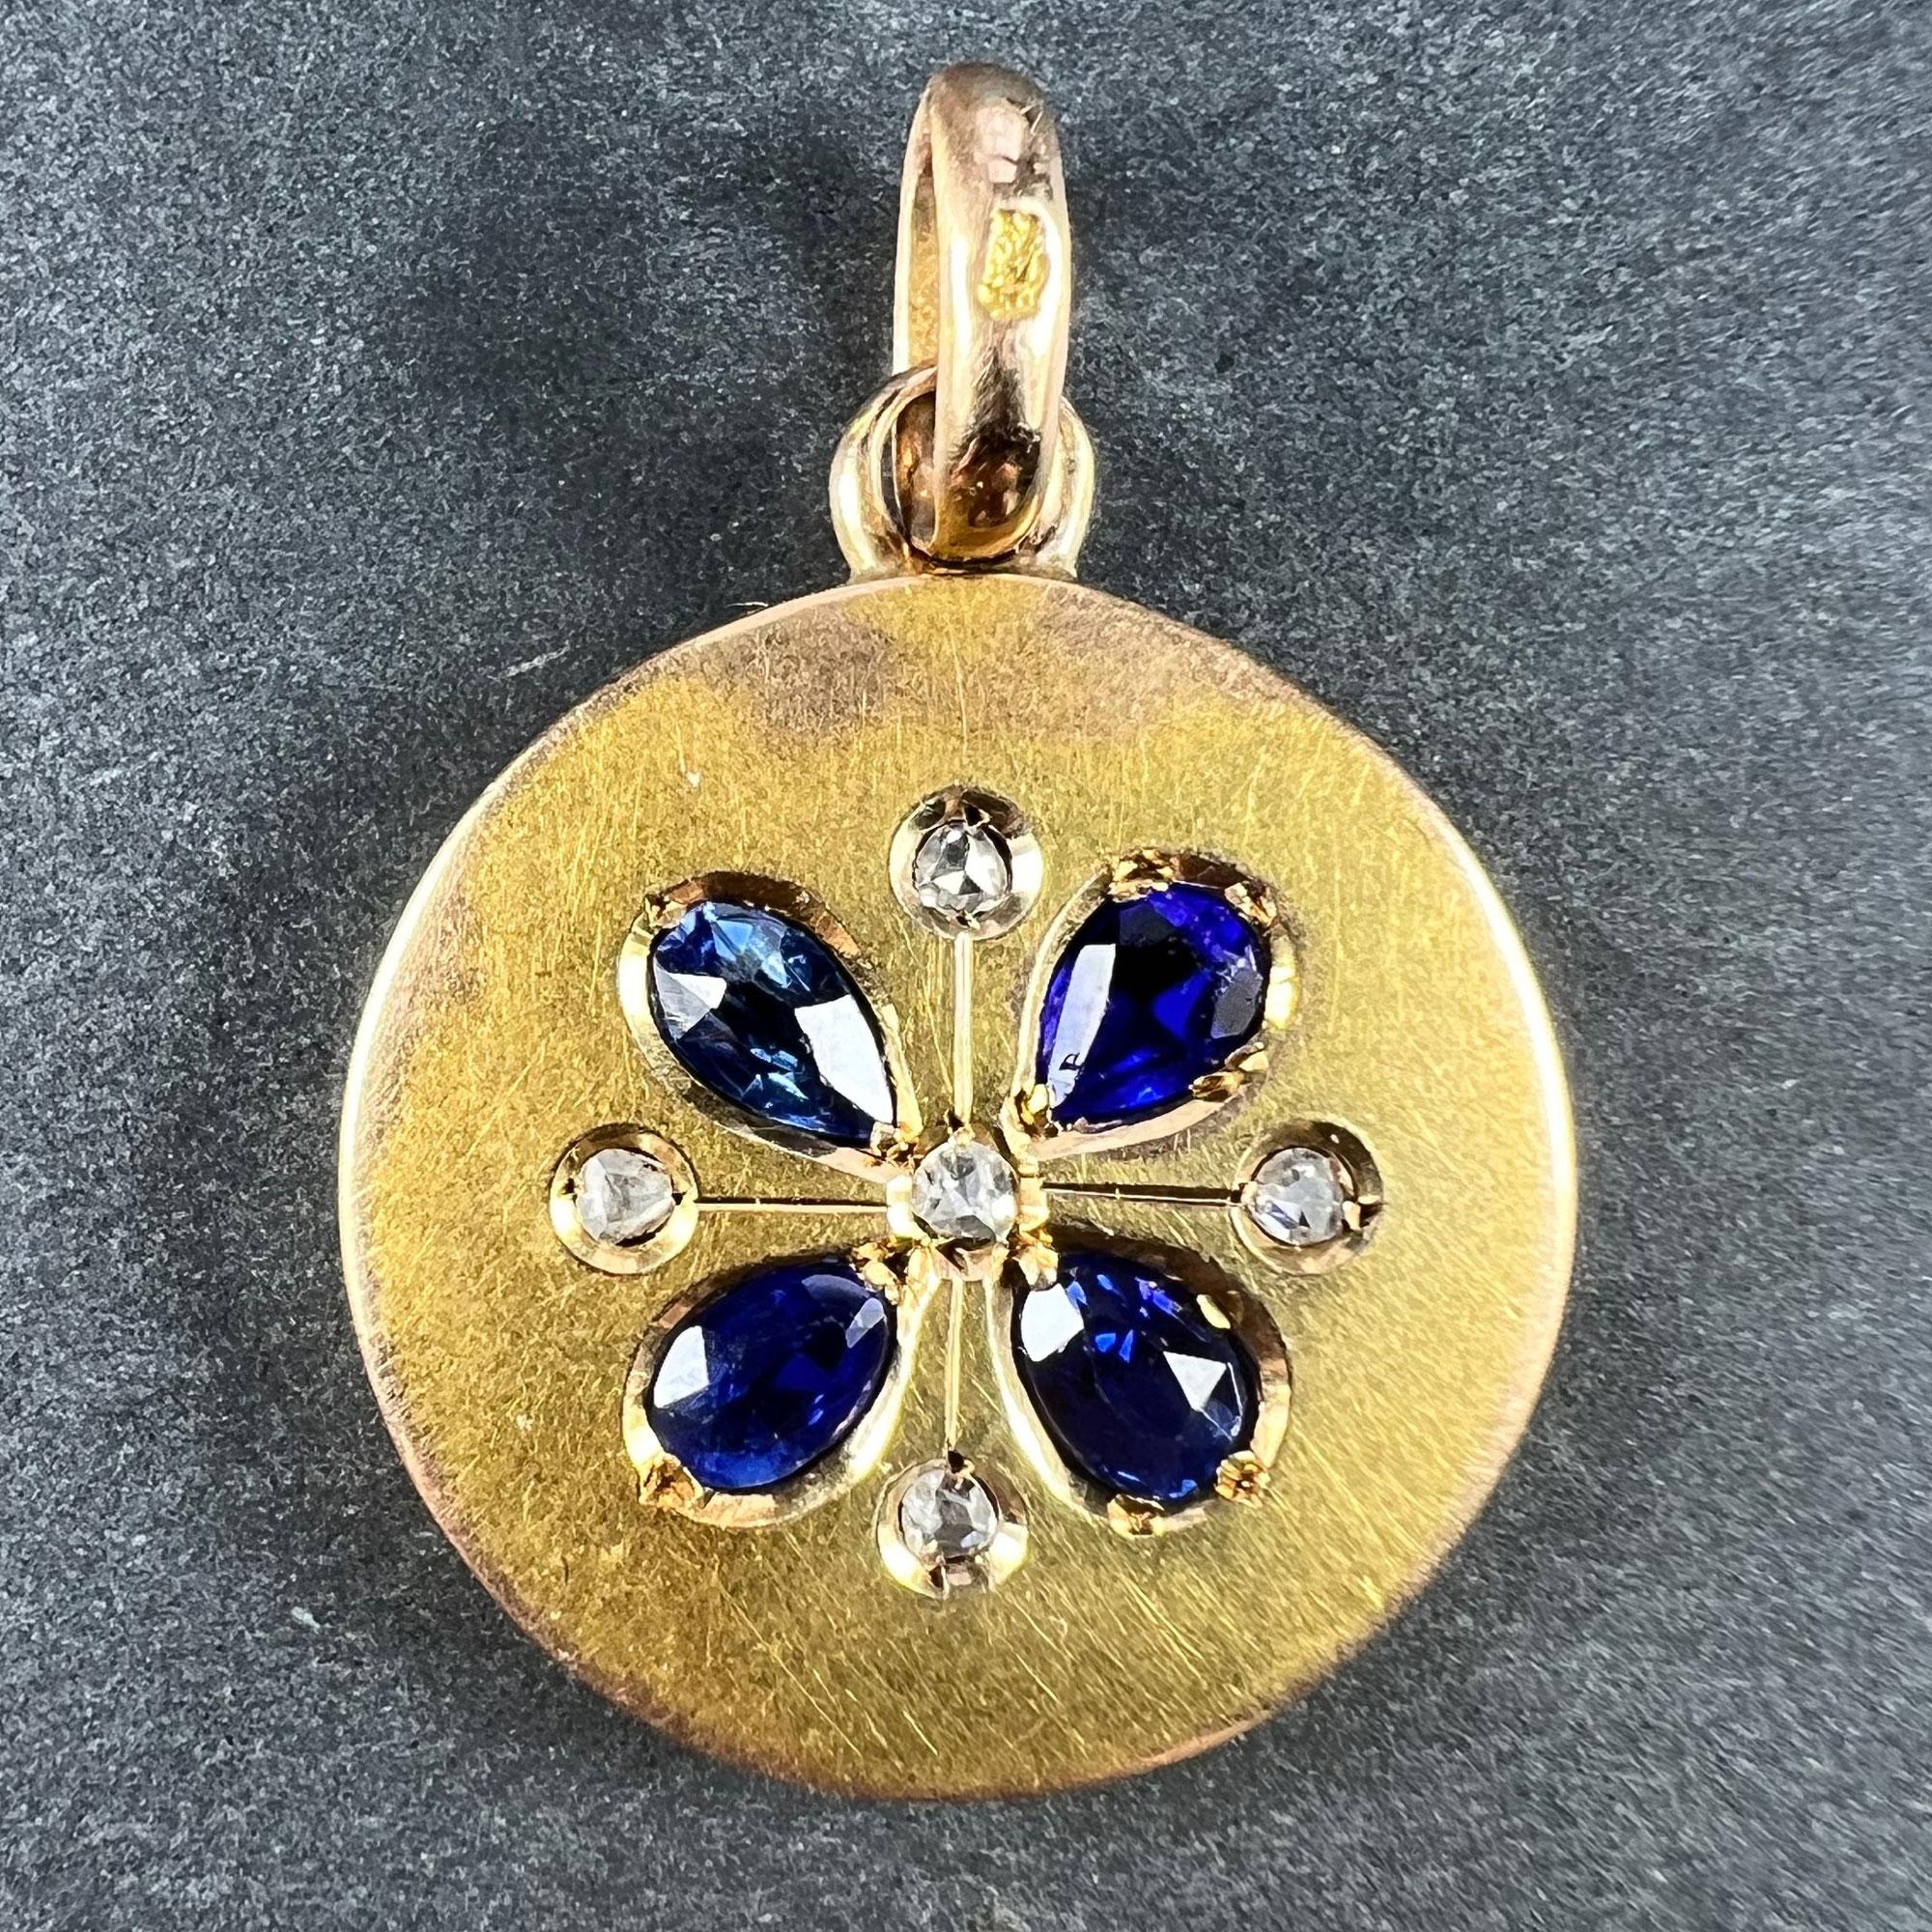 A French 18 karat (18K) yellow gold charm pendant designed as a lucky four-leaf clover or shamrock set with four pear-shaped blue sapphire and paste leaves, centring a rose-cut diamond, with rose-cut diamonds between each blue stone. One blue